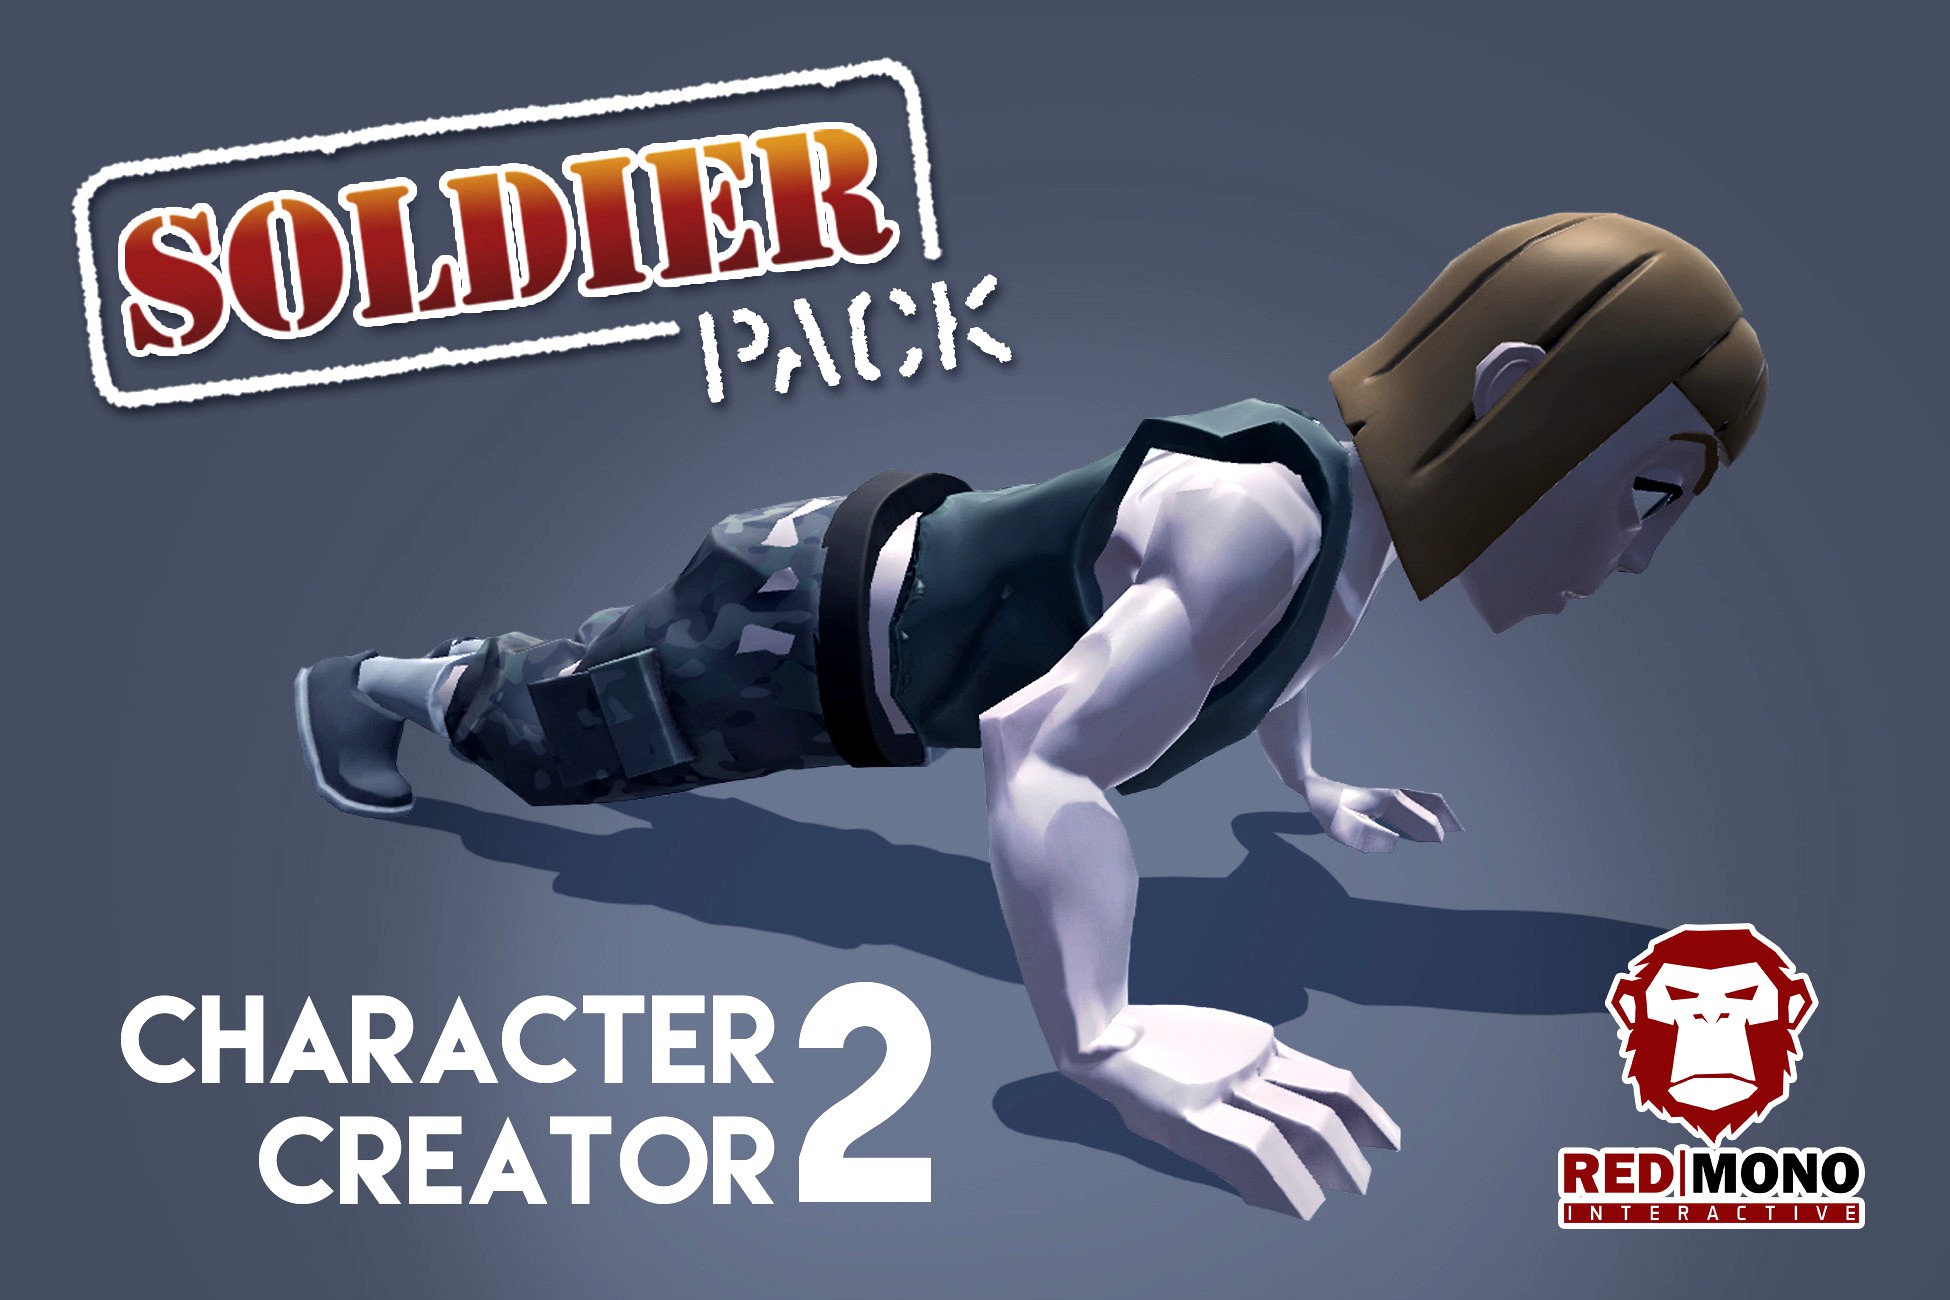 Character Creator 2 - Soldier Pack